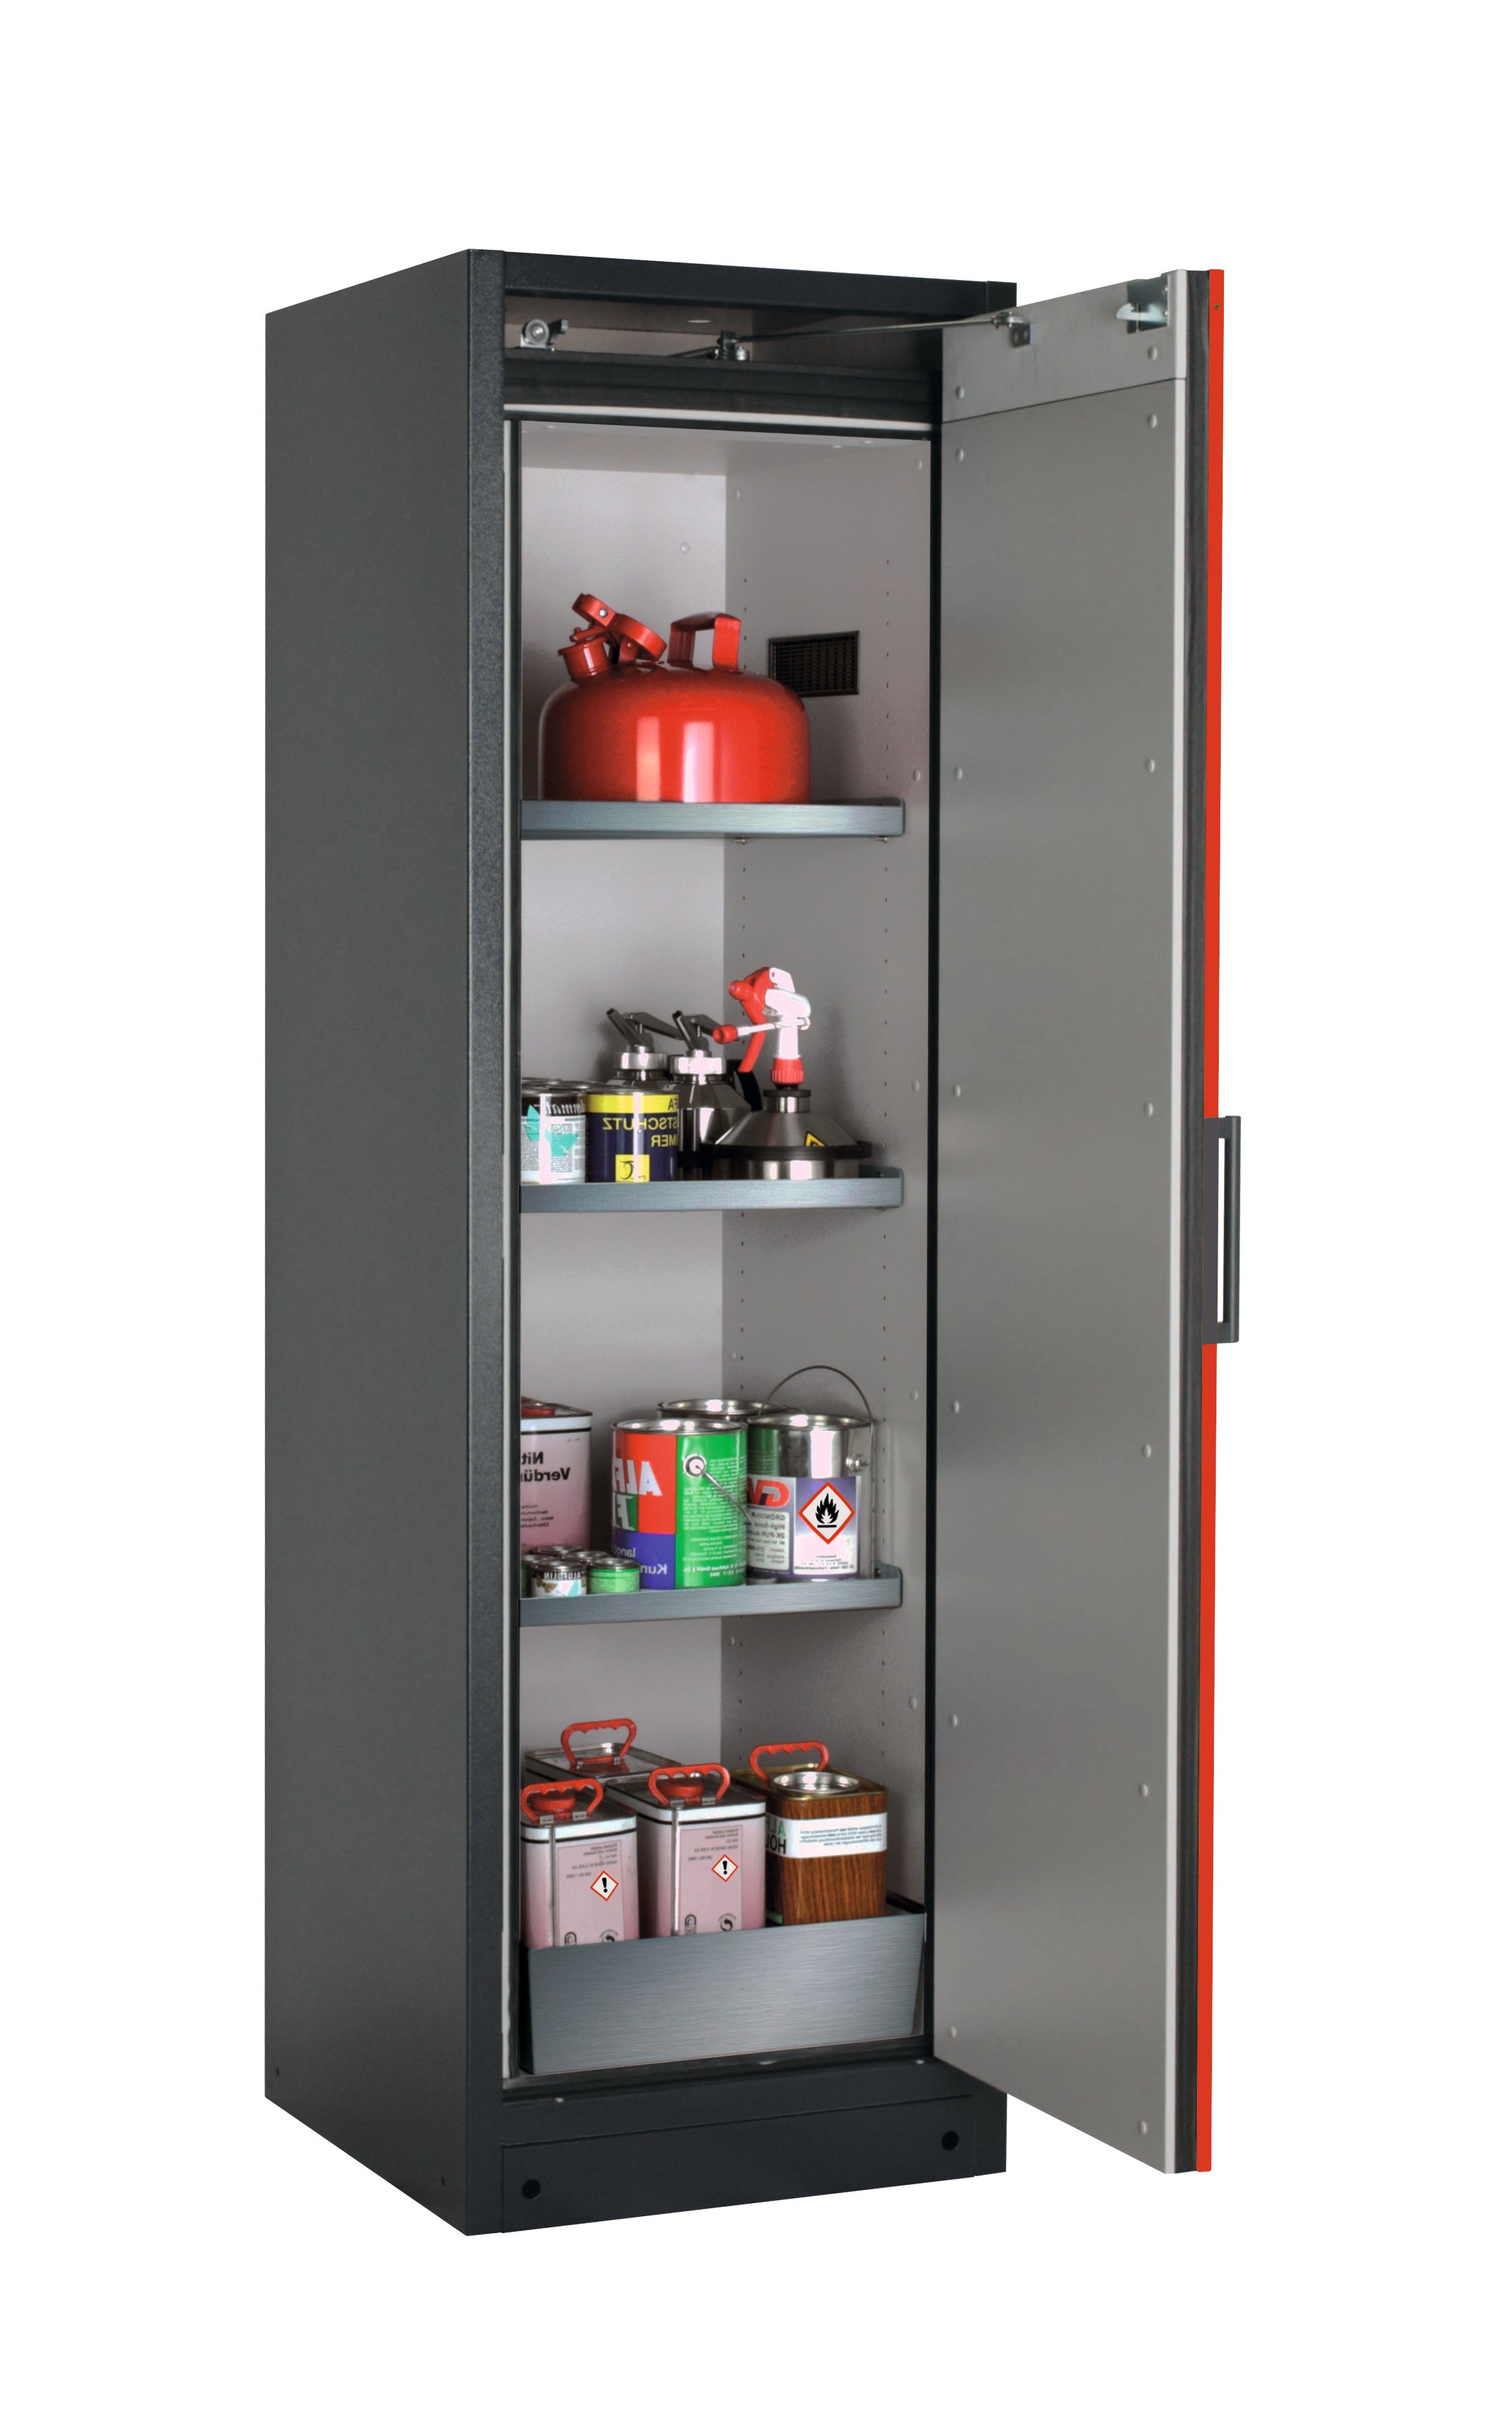 Type 90 safety storage cabinet Q-CLASSIC-90 model Q90.195.060.R in traffic red RAL 3020 with 3x shelf standard (stainless steel 1.4301),